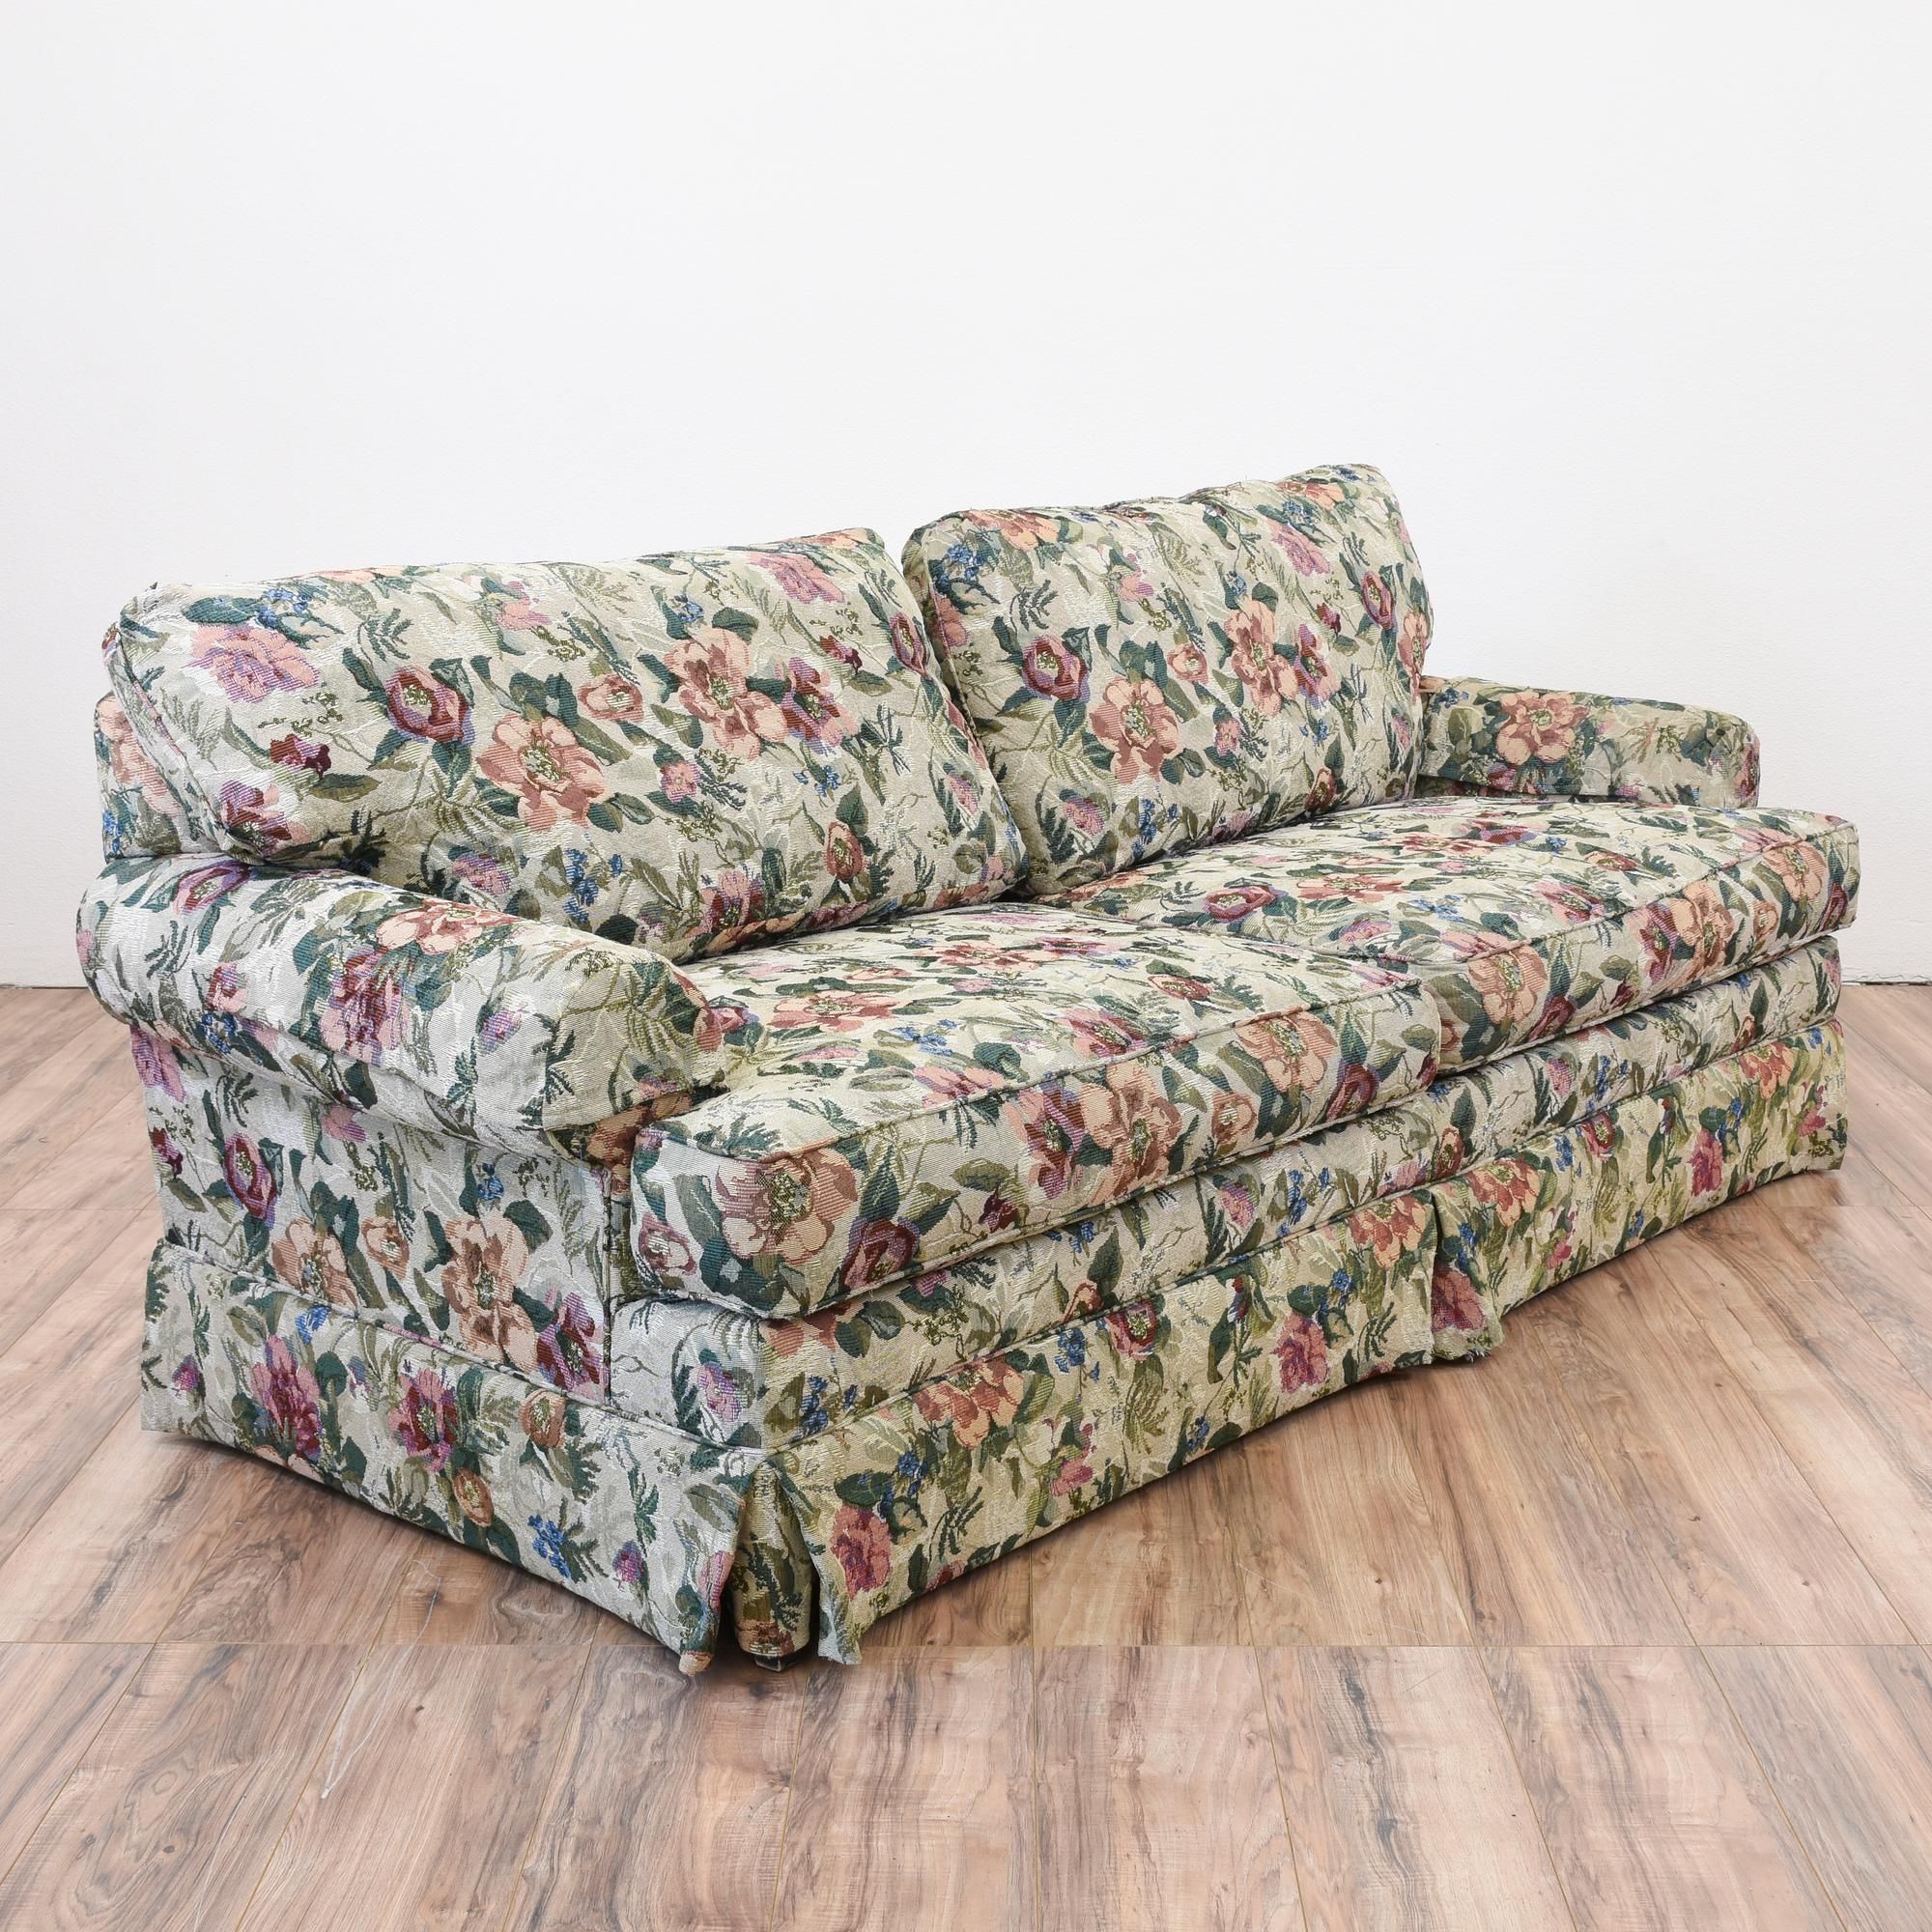 This Colorful Sofa Is Featured In Grey Needlepoint Fabric And Floral Intended For Sofas In Pattern (View 13 of 20)